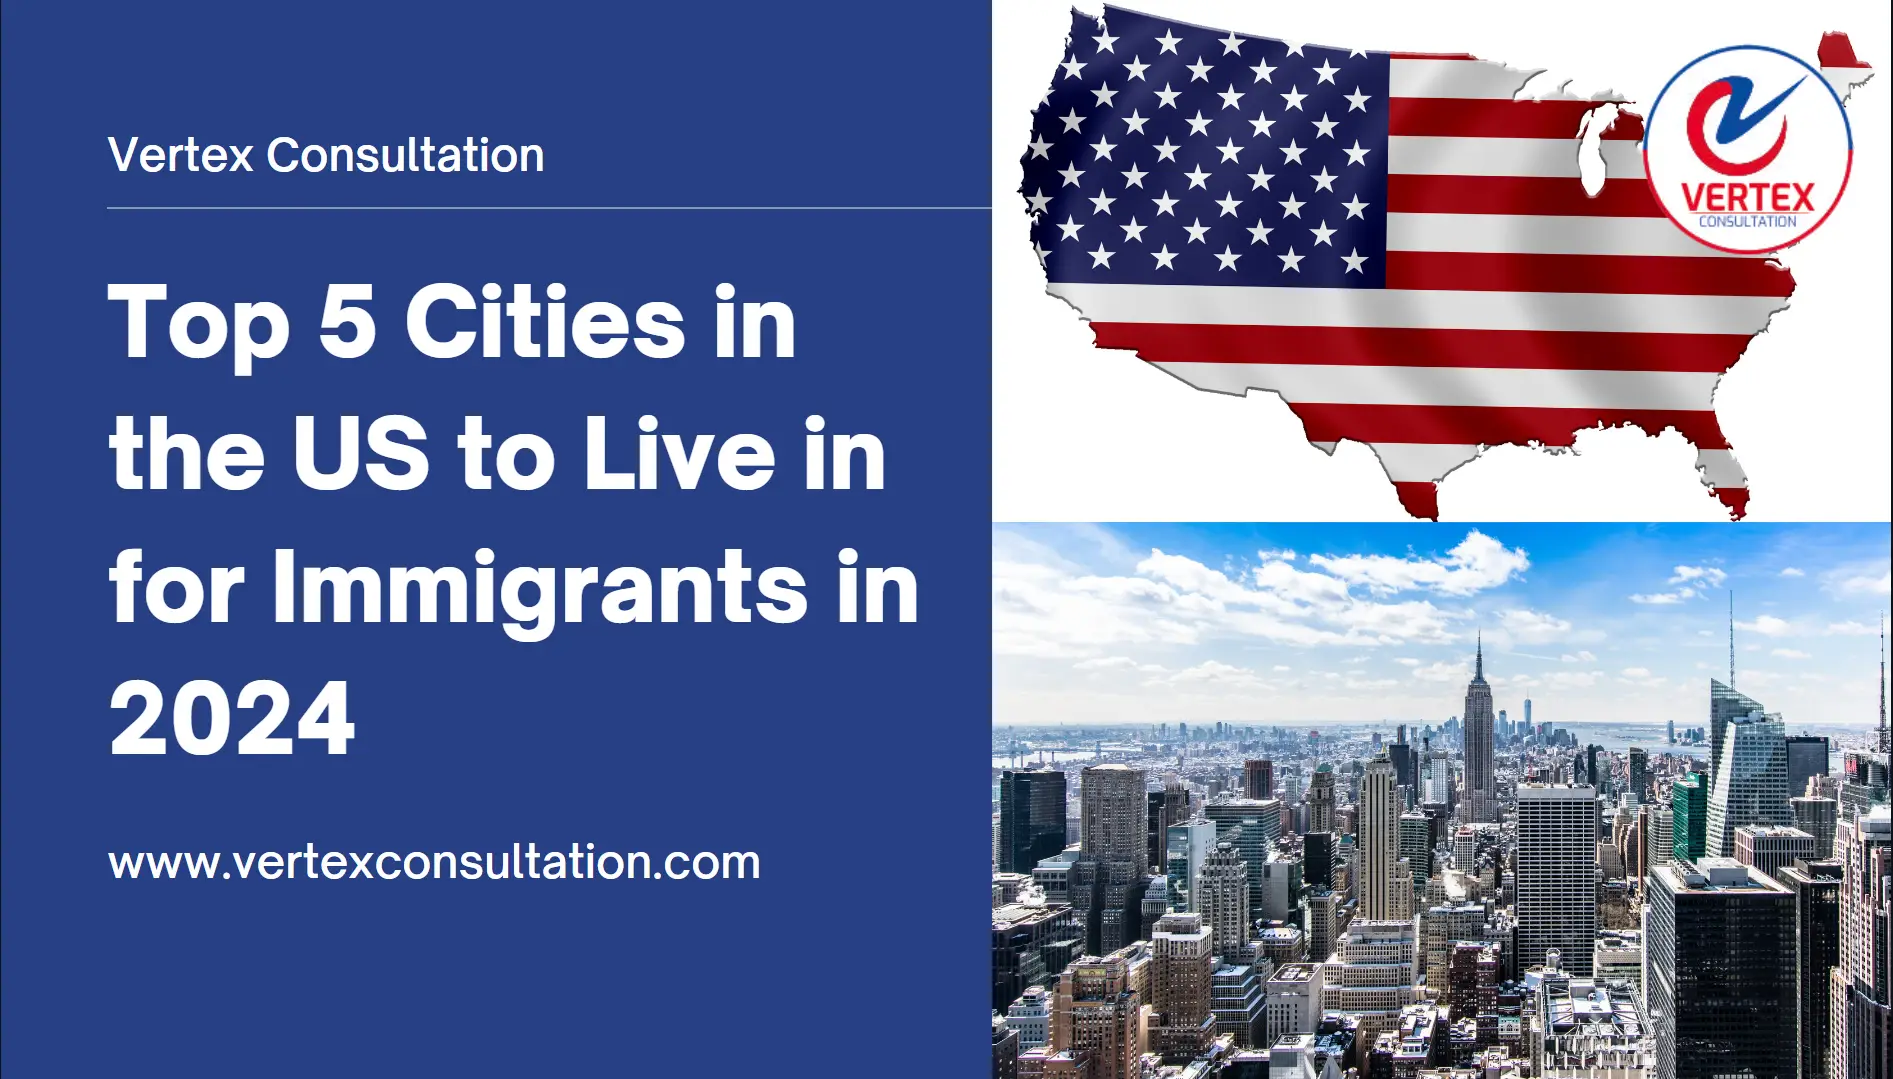 Top 5 Cities in the US to Live in for Immigrants in 2024